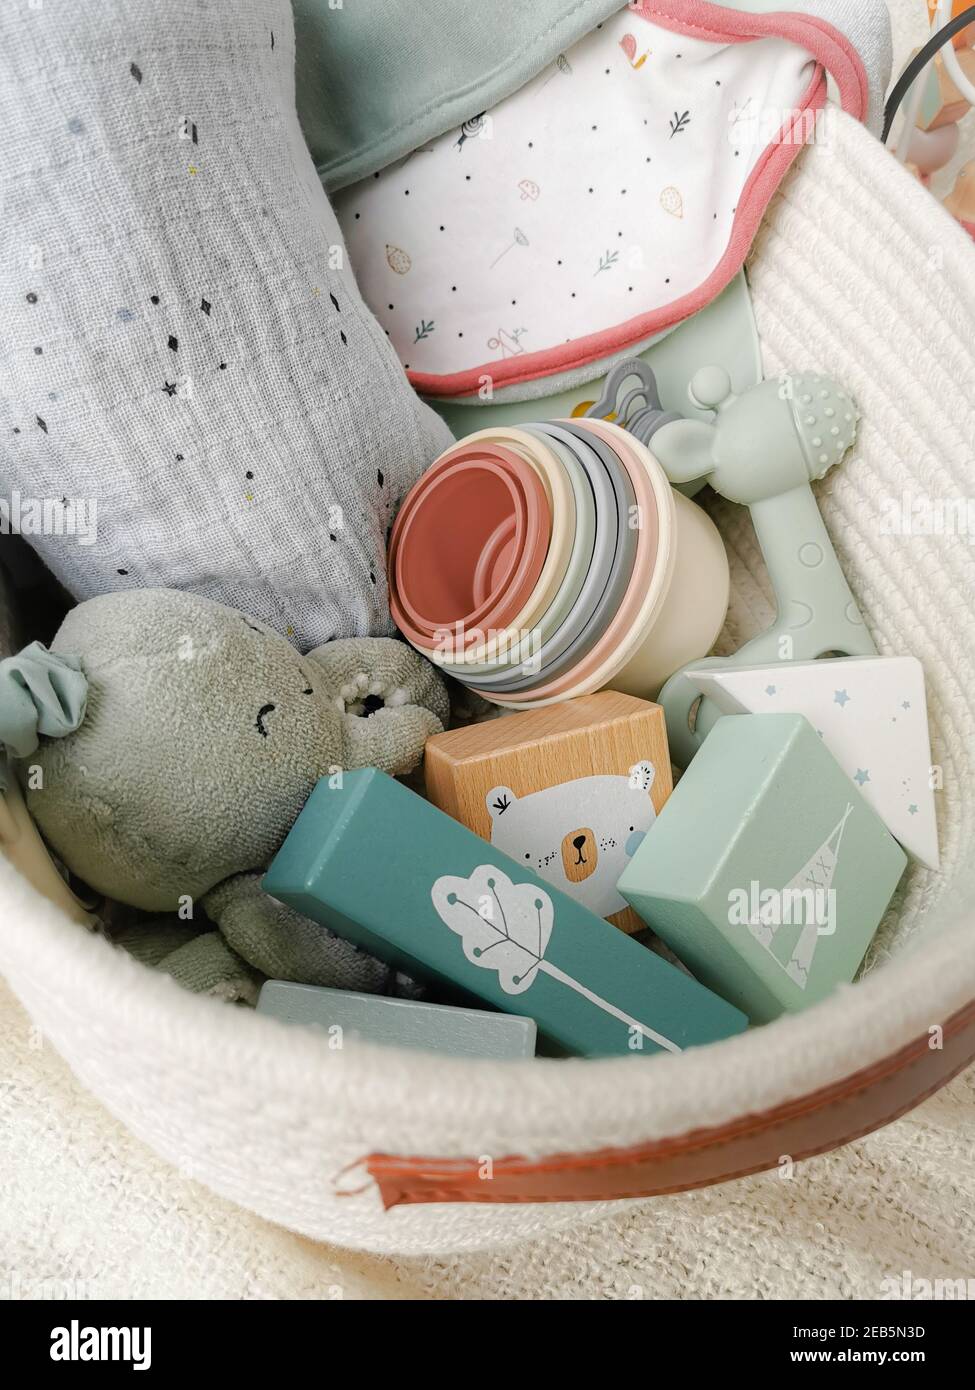 Gender neutral gift set for a baby shower with toys in soft colors. Gender-neutral parenting. Stock Photo